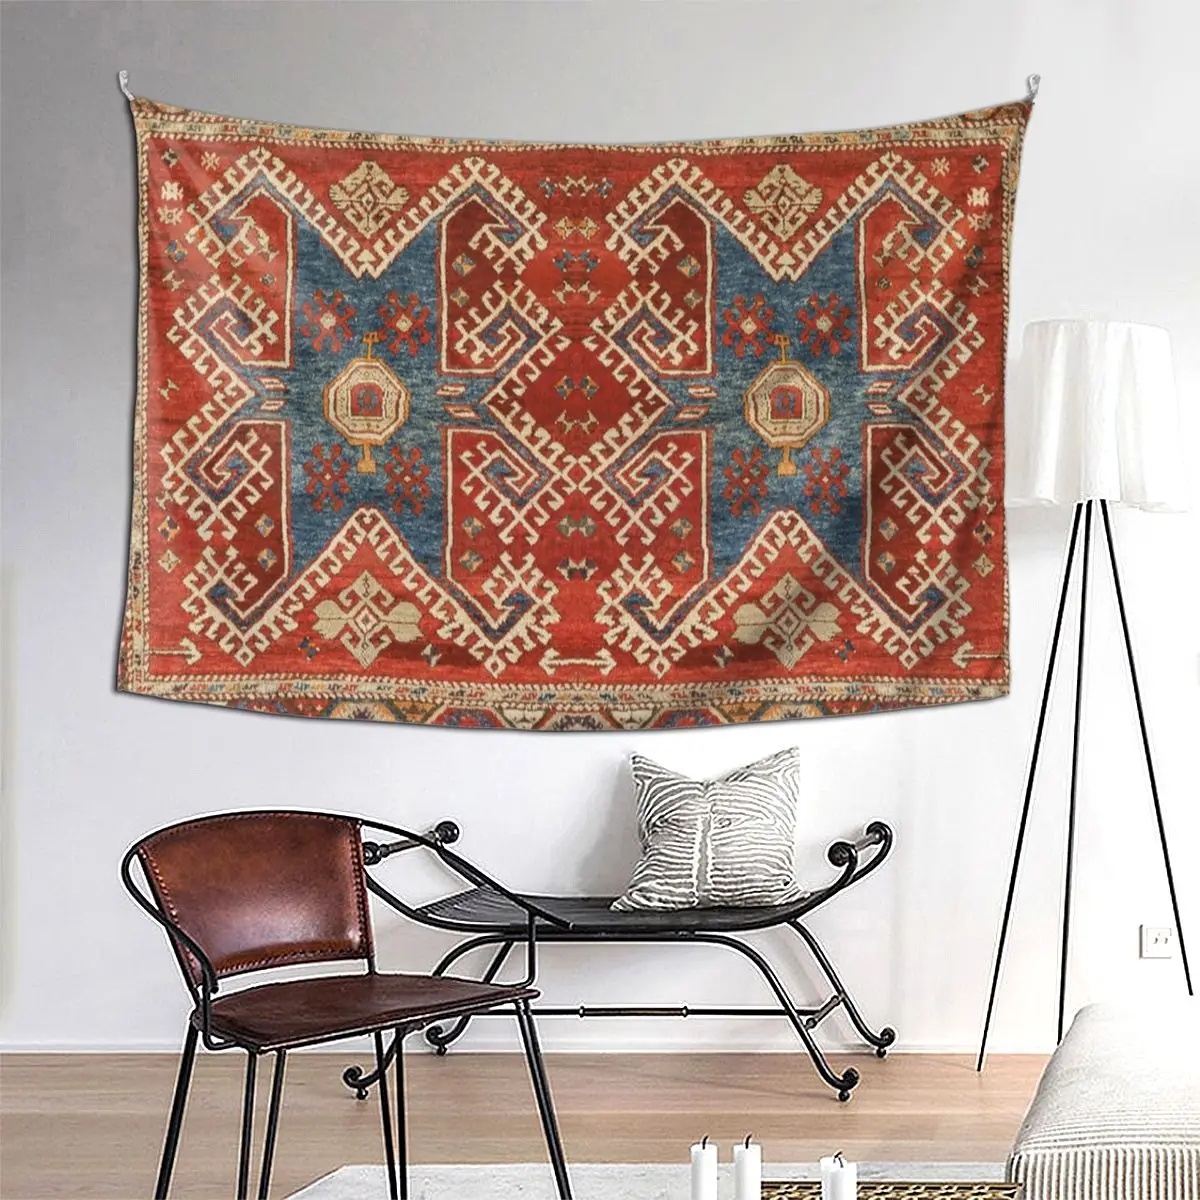 

Oriental Heritage Bohemian Design Tapestry Hippie Wall Hanging Aesthetic Home Decor Tapestries for Living Room Bedroom Dorm Room